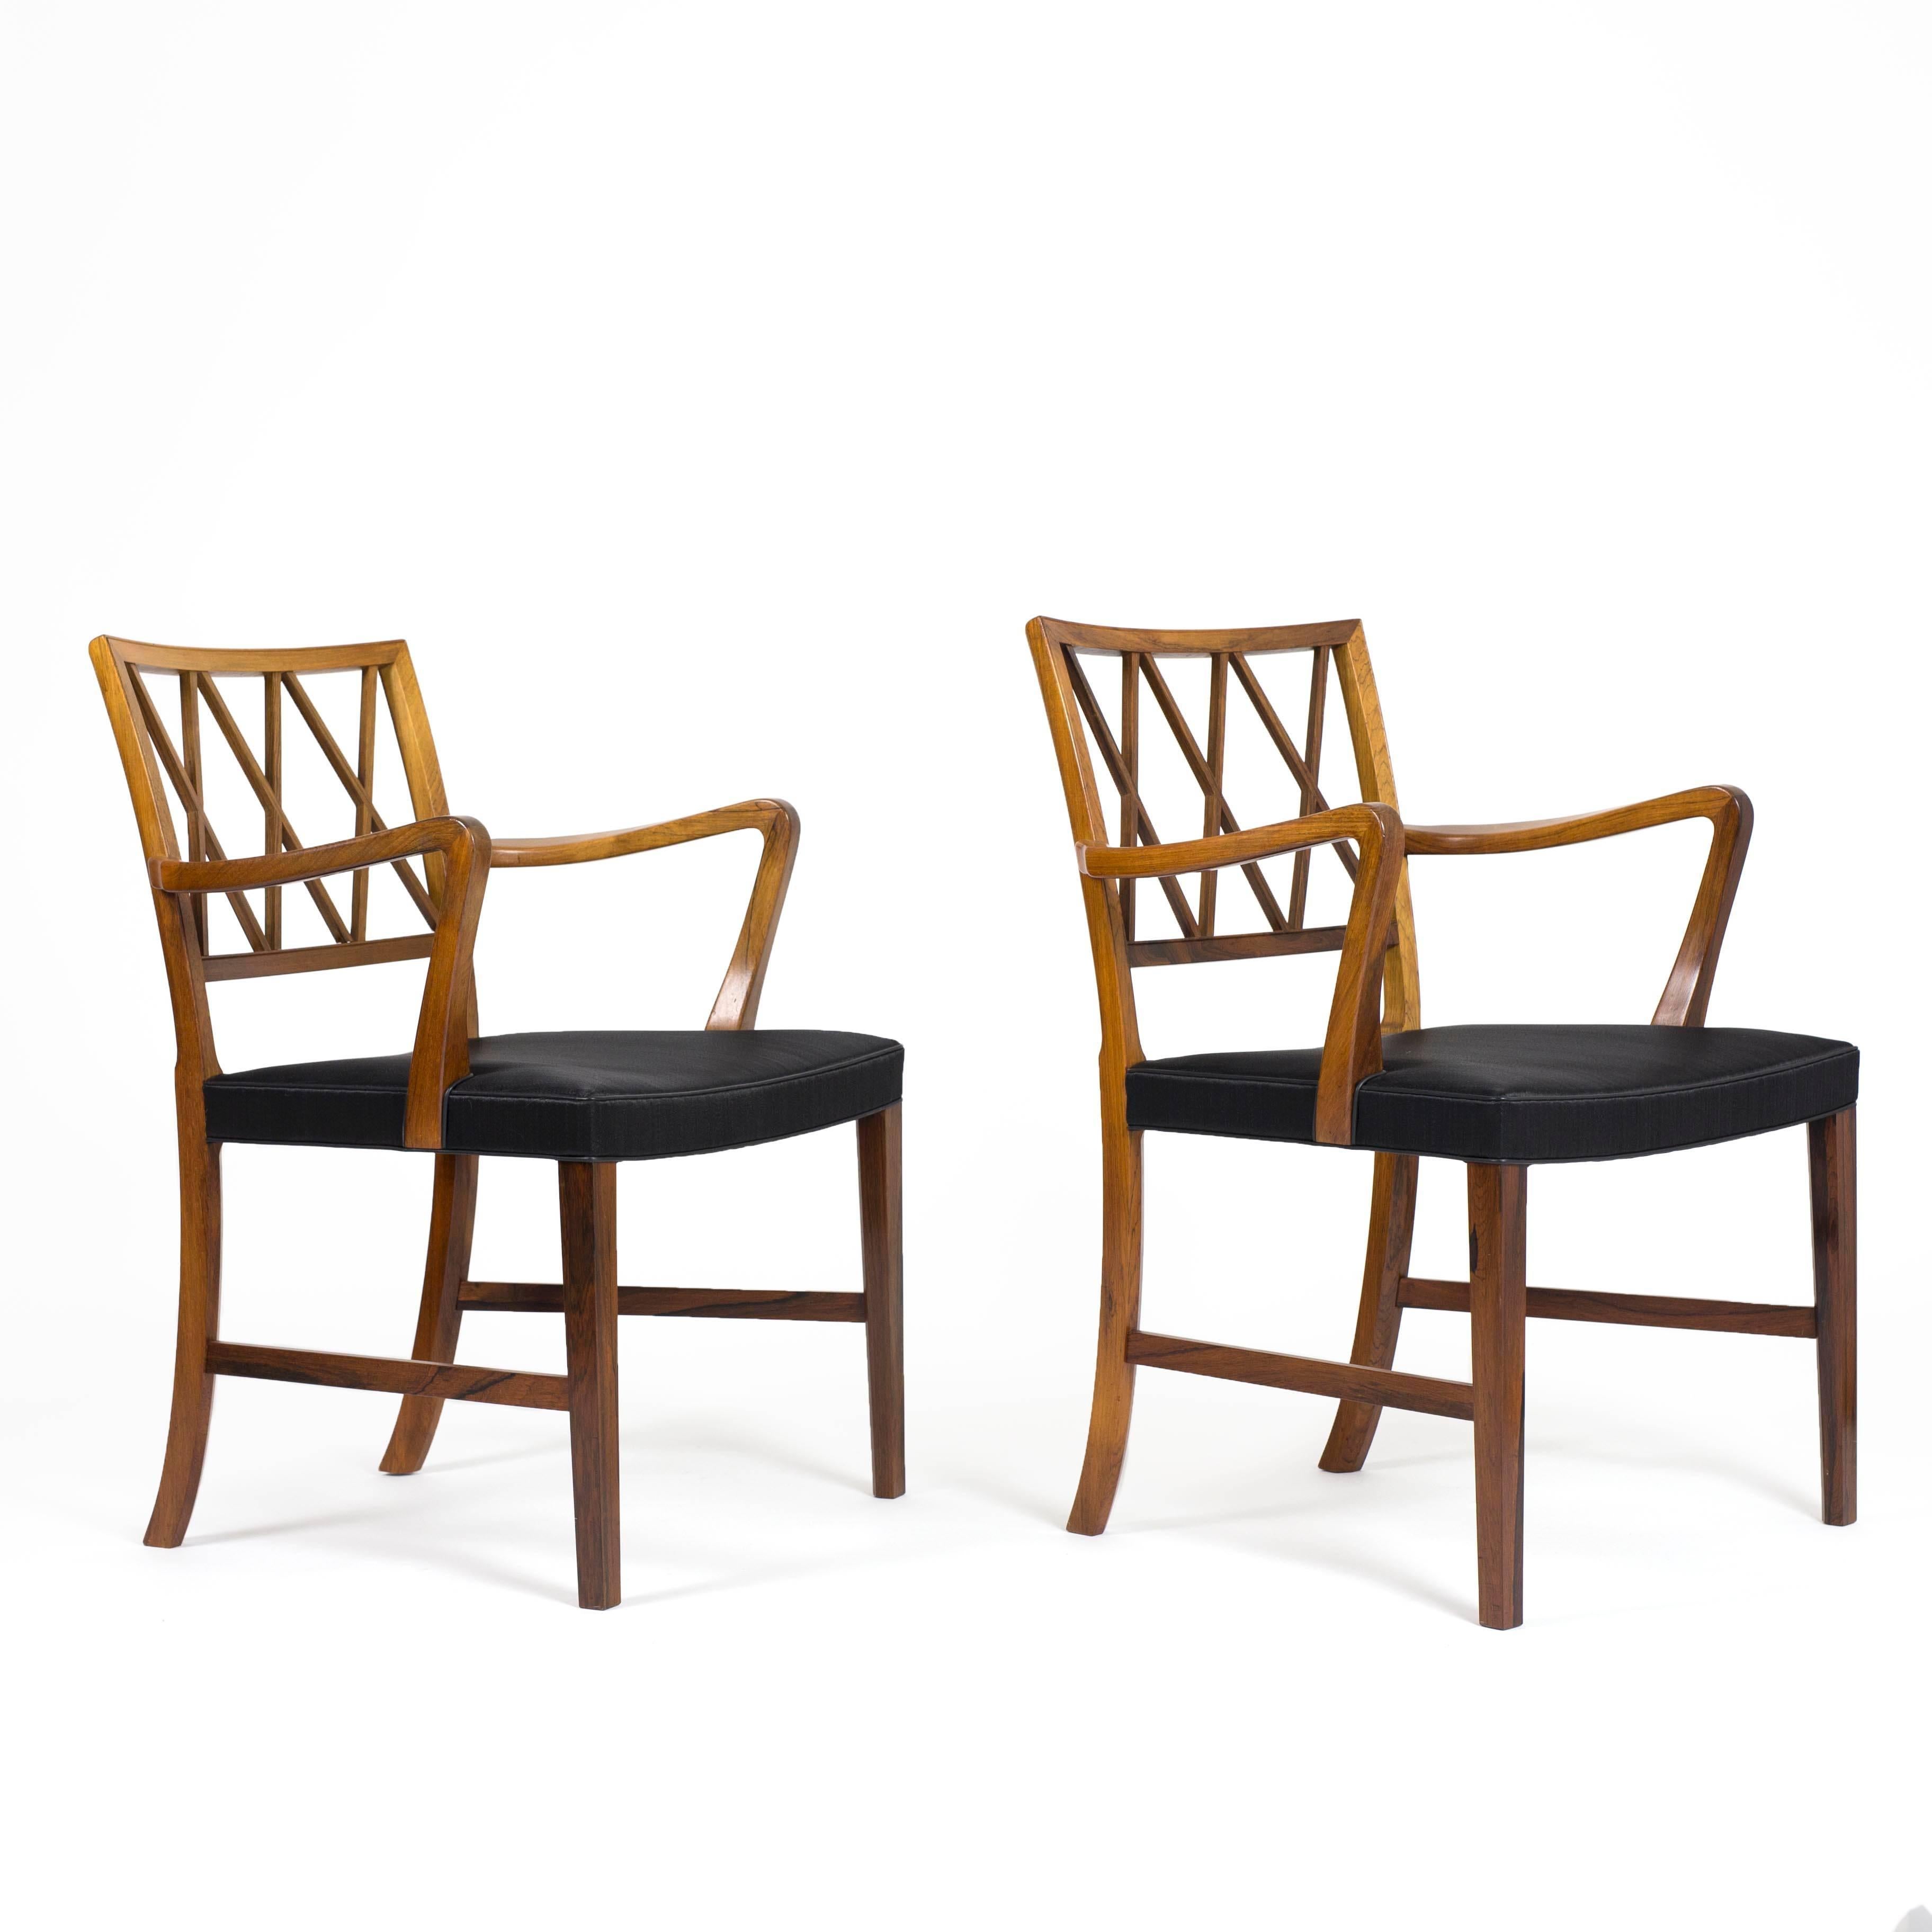 A pair of Ole Wanscher rosewood armchairs upholstered with black horsehair. 

Designed by Ole Wancher 1942, executed by A. J. Iversen, Denmark. 

Very fine condition.